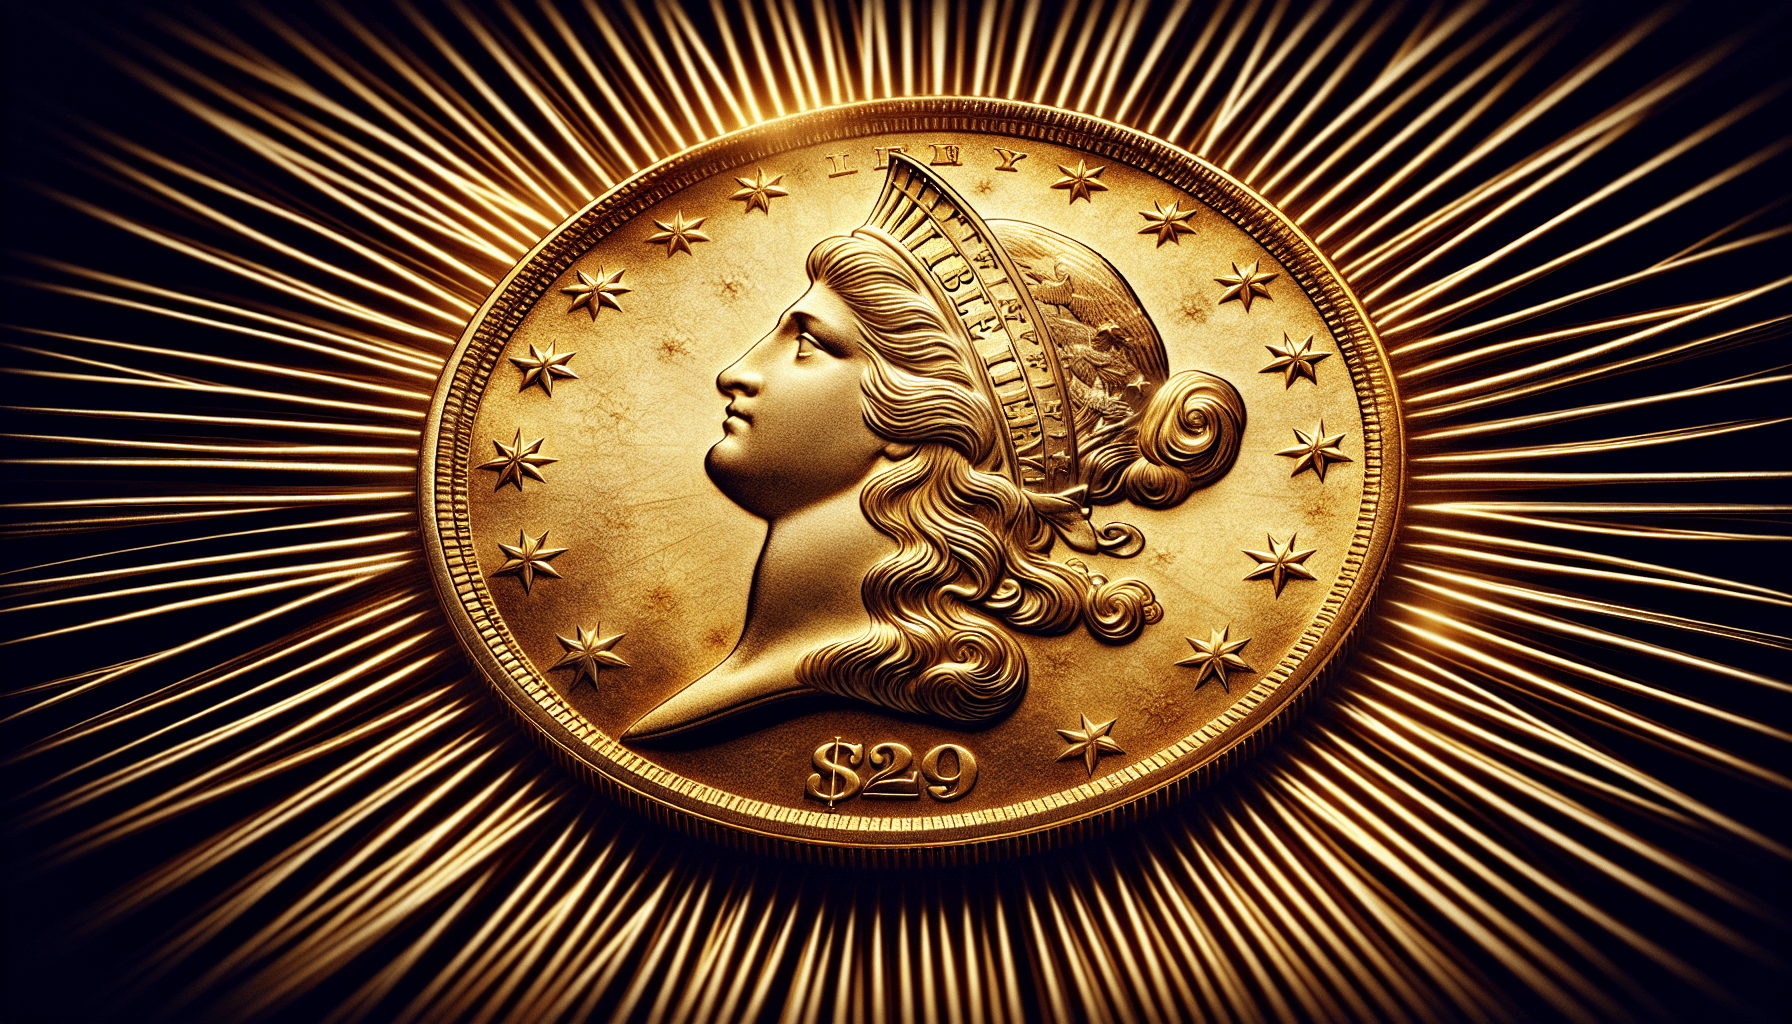 American Coin Treasures 1849 P Liberty Gold Piece $20 American Mint State Review